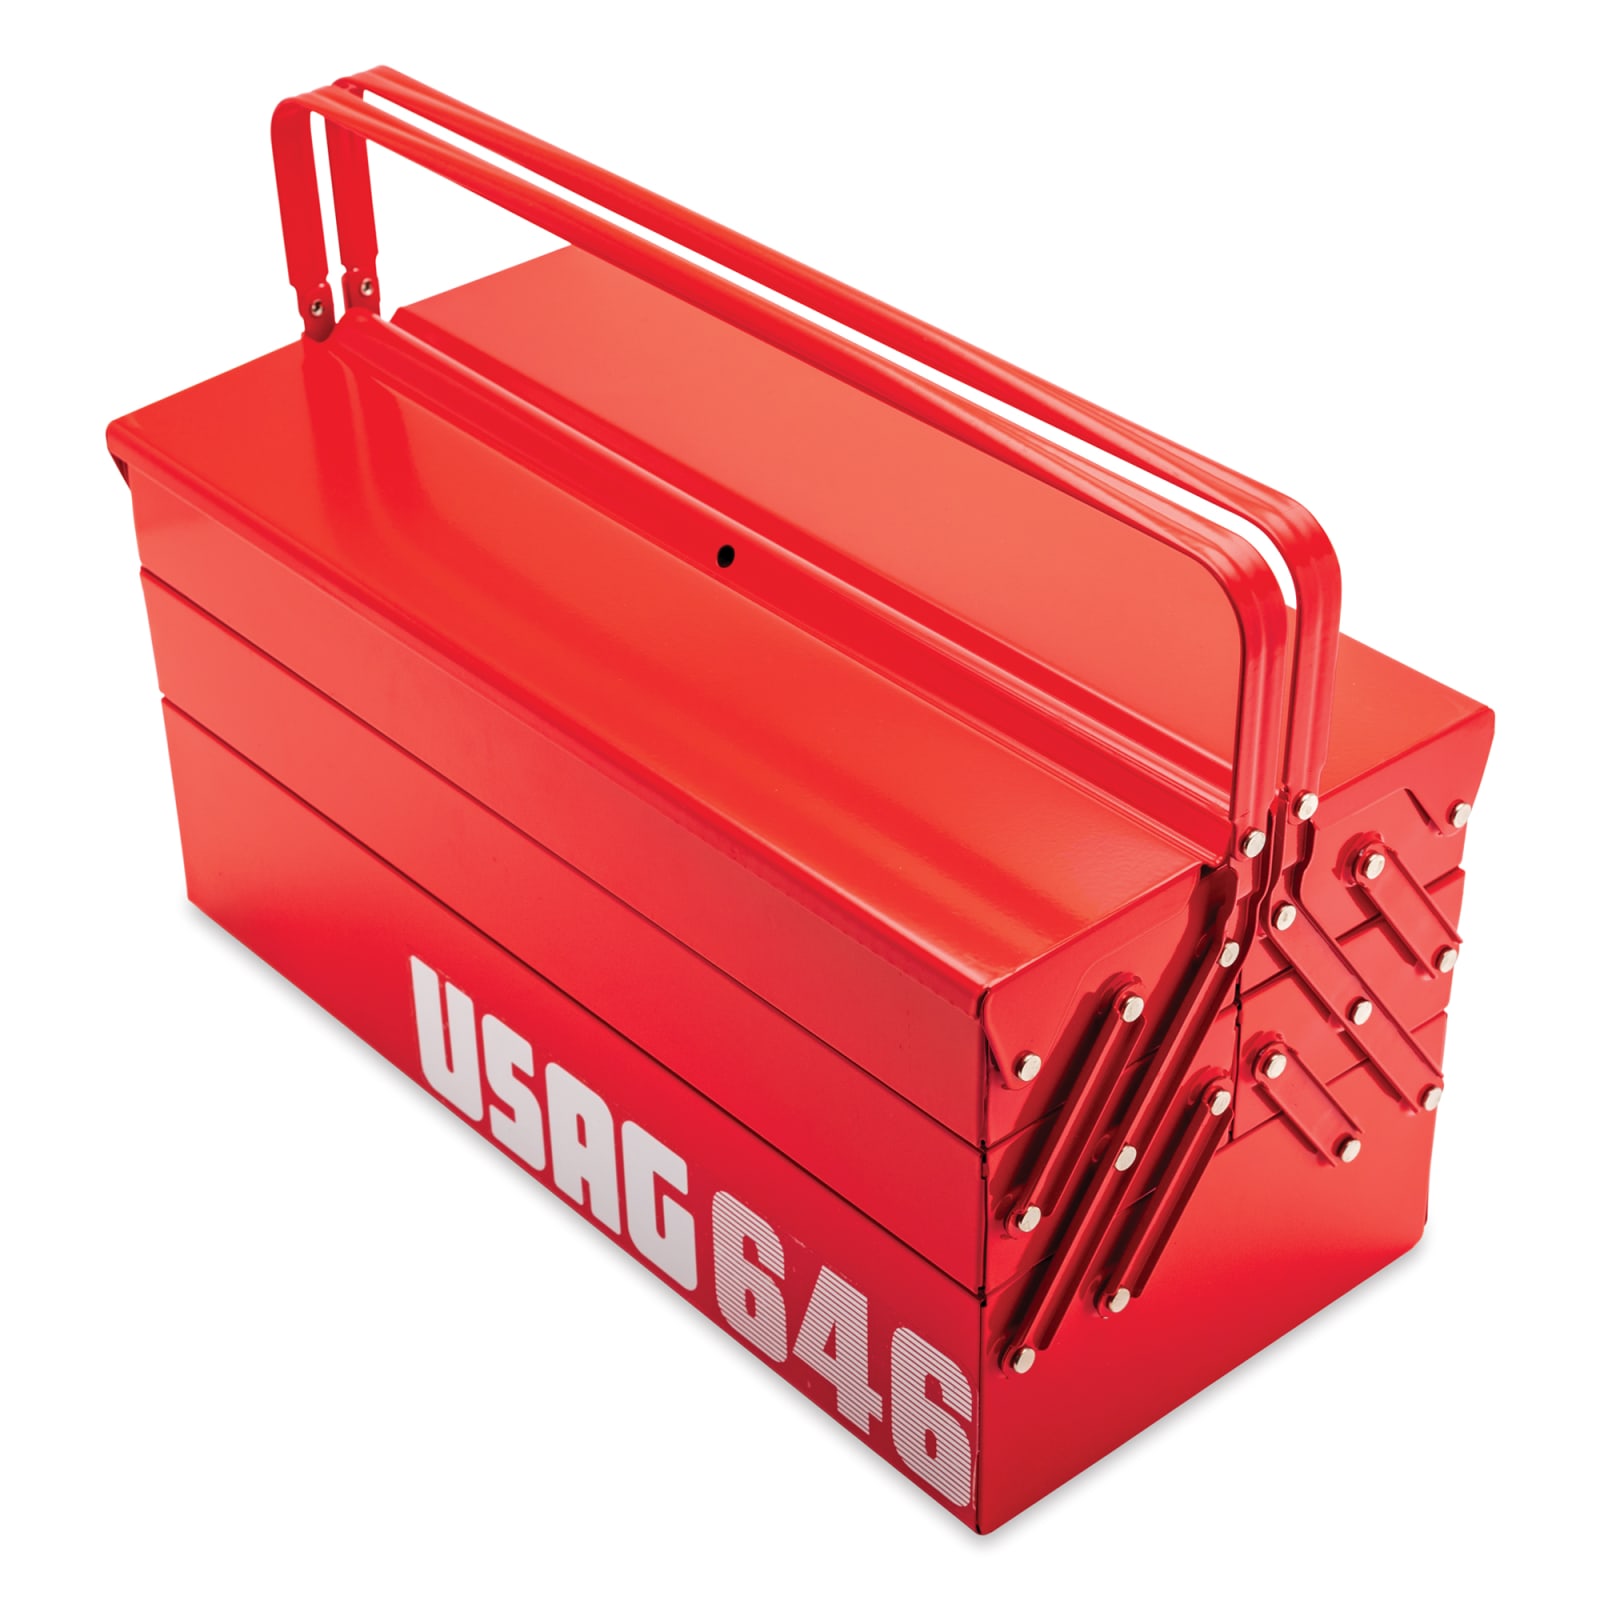 Steel Tool Box: 1 Compartment